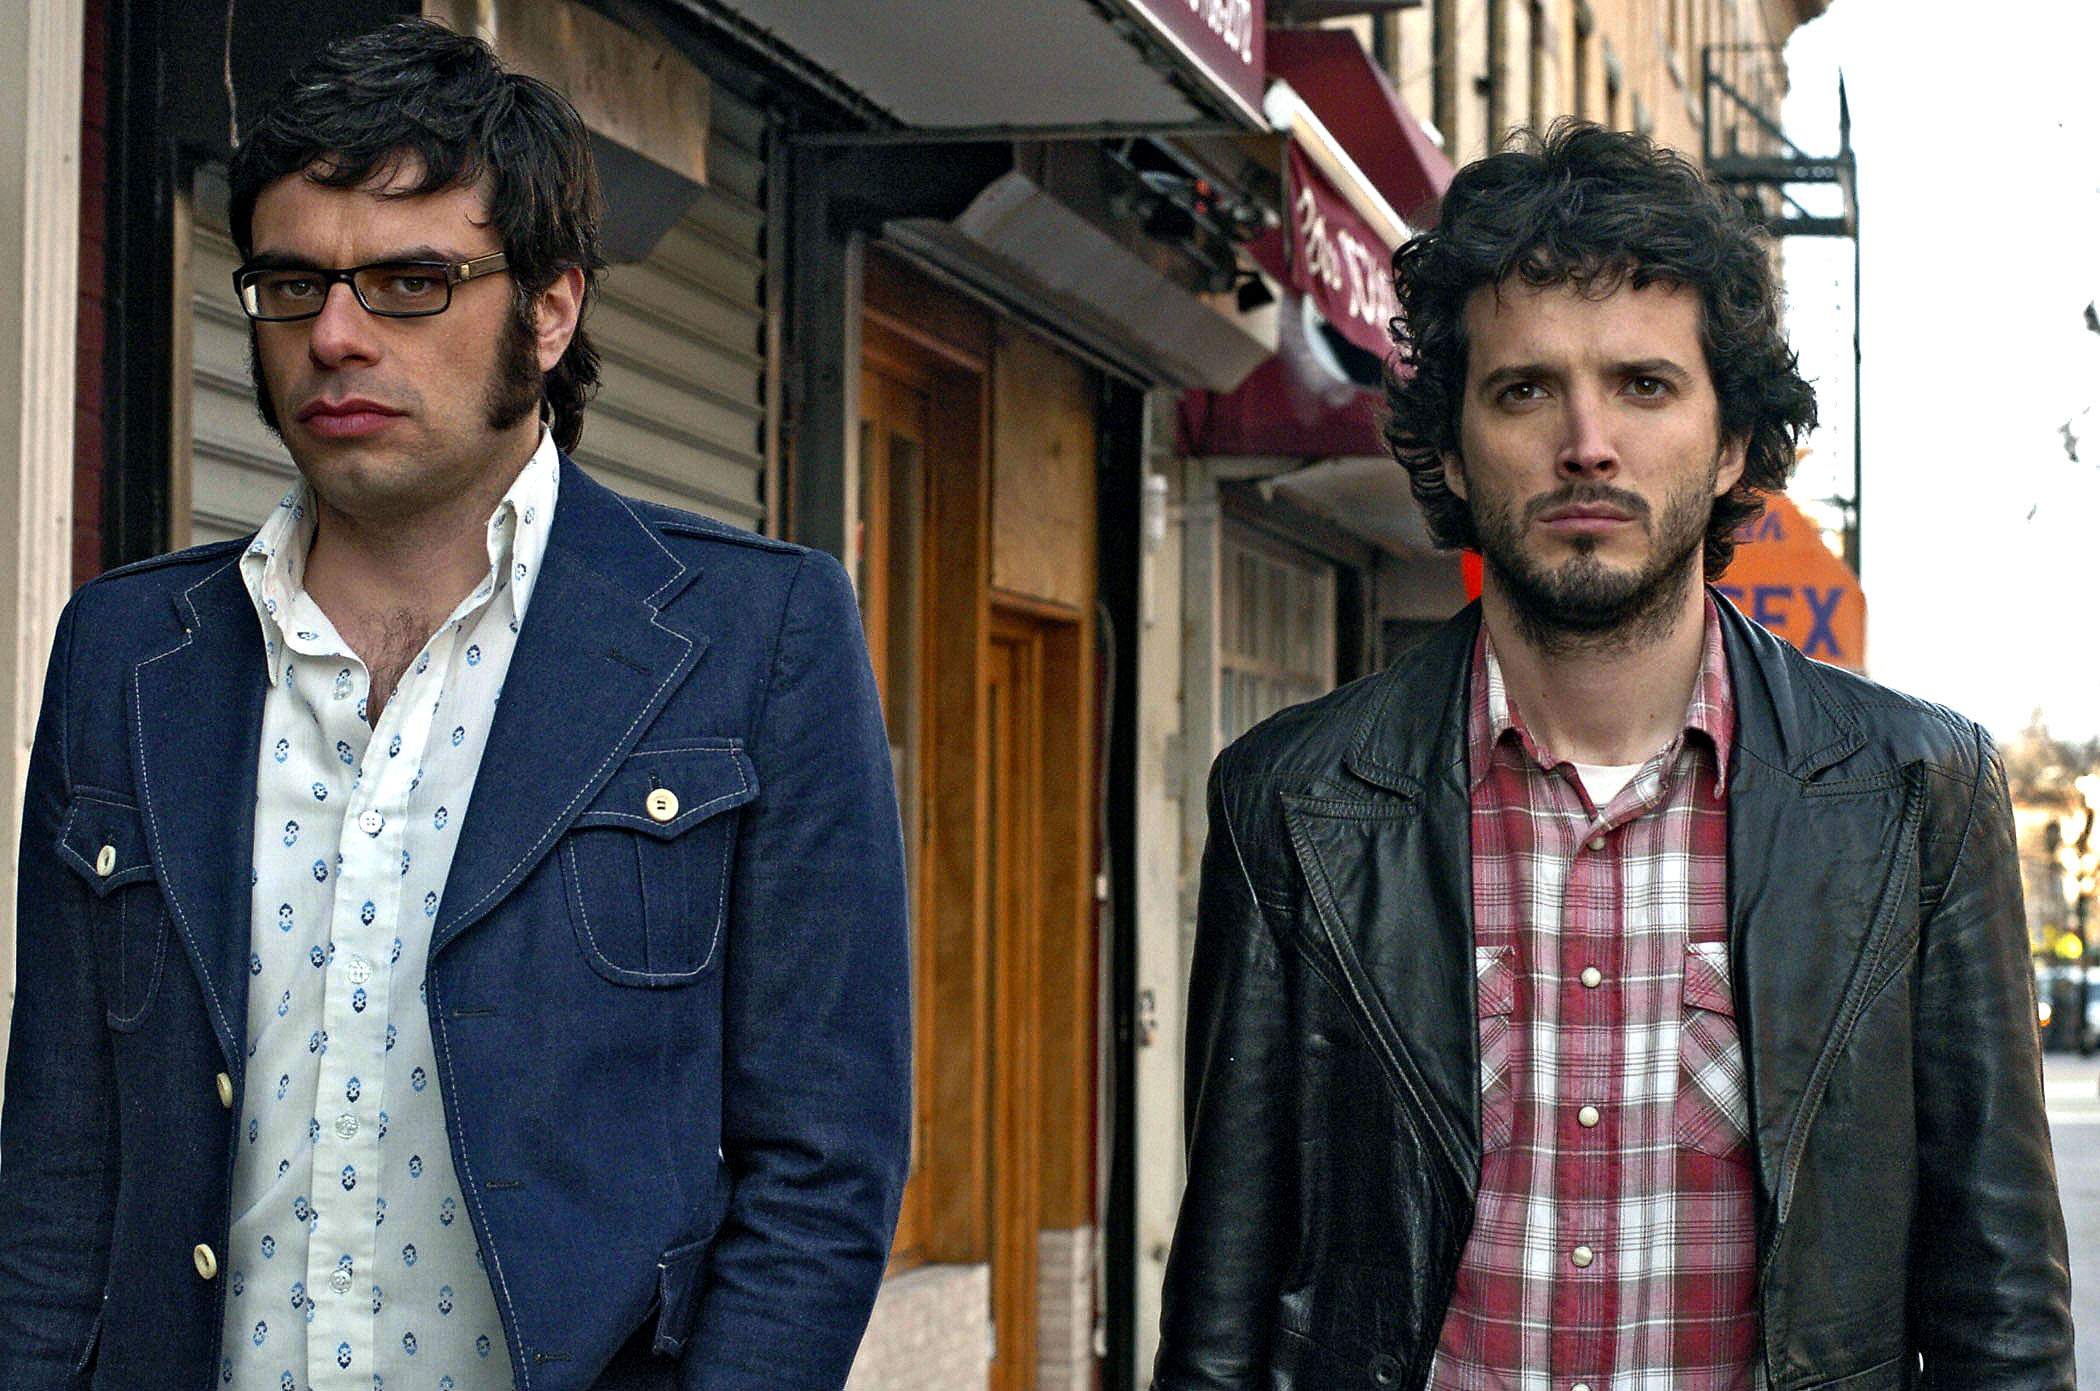 Flight of the Conchords have kept their fans despite not having been on the air in a long while.